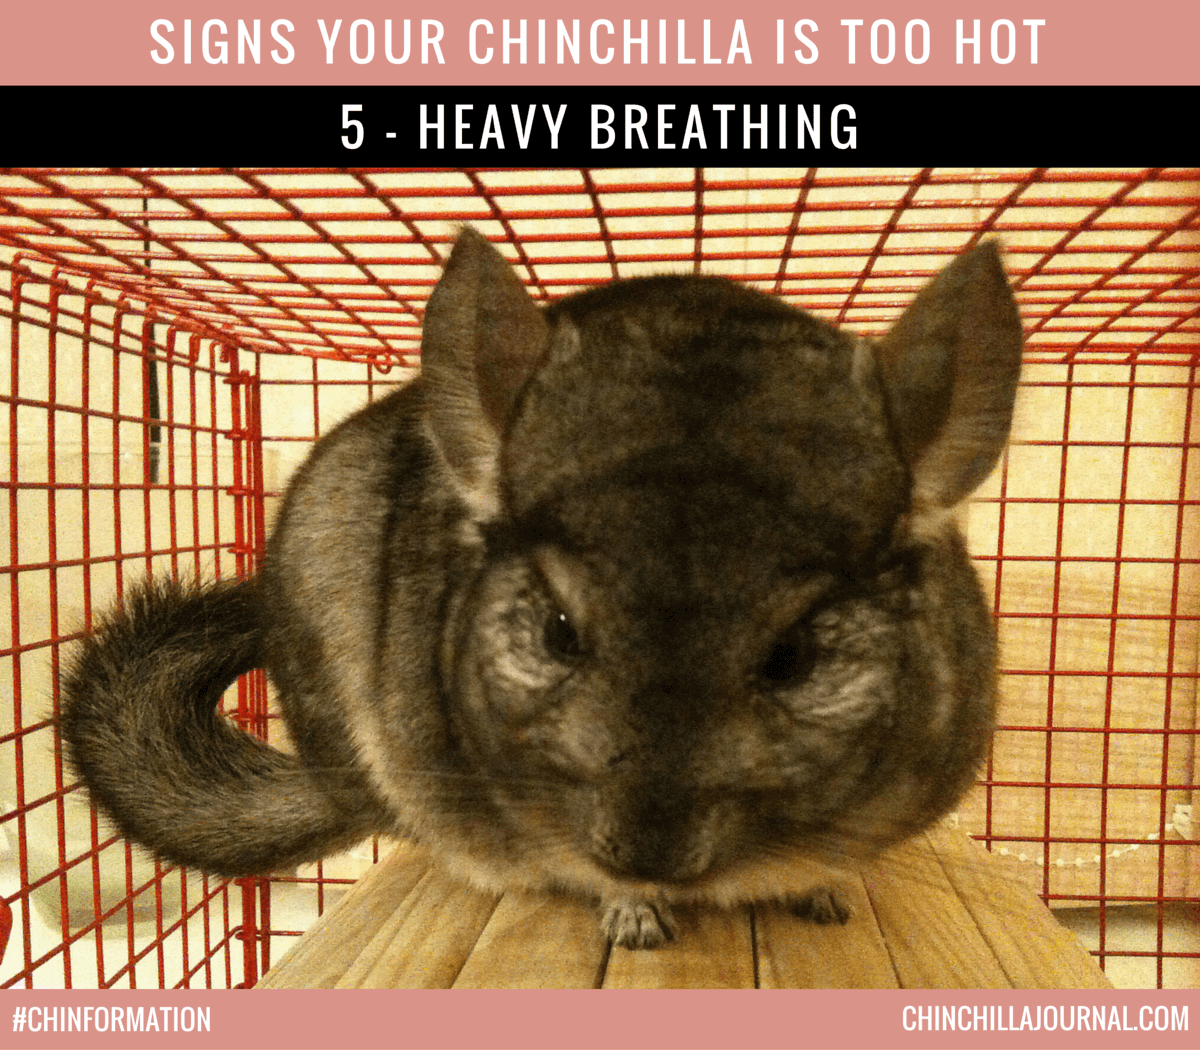 Signs Your Chinchilla Is Too Hot 5 - Heavy Breathing